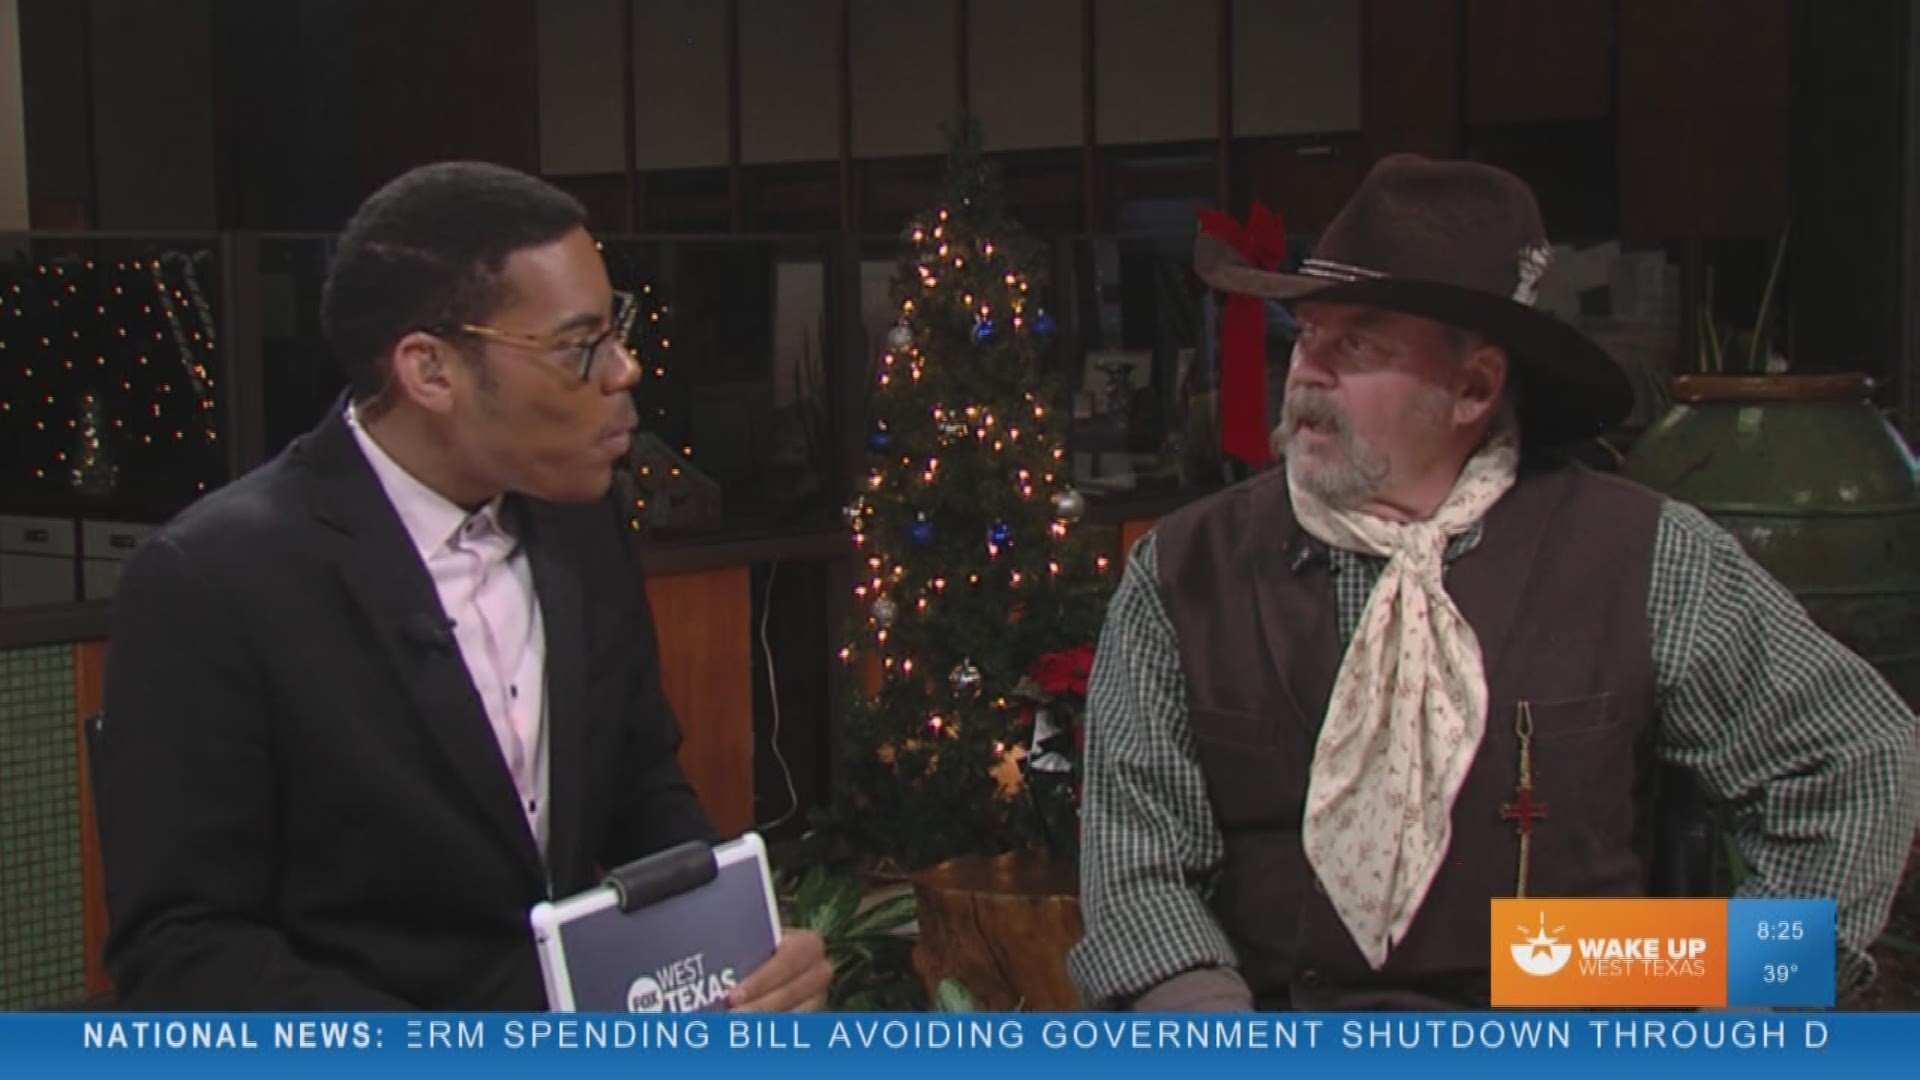 Our Malik Mingo speaks with the Concho Cowboy Company about what they are going to be doing for Christmas at Old Fort Concho.